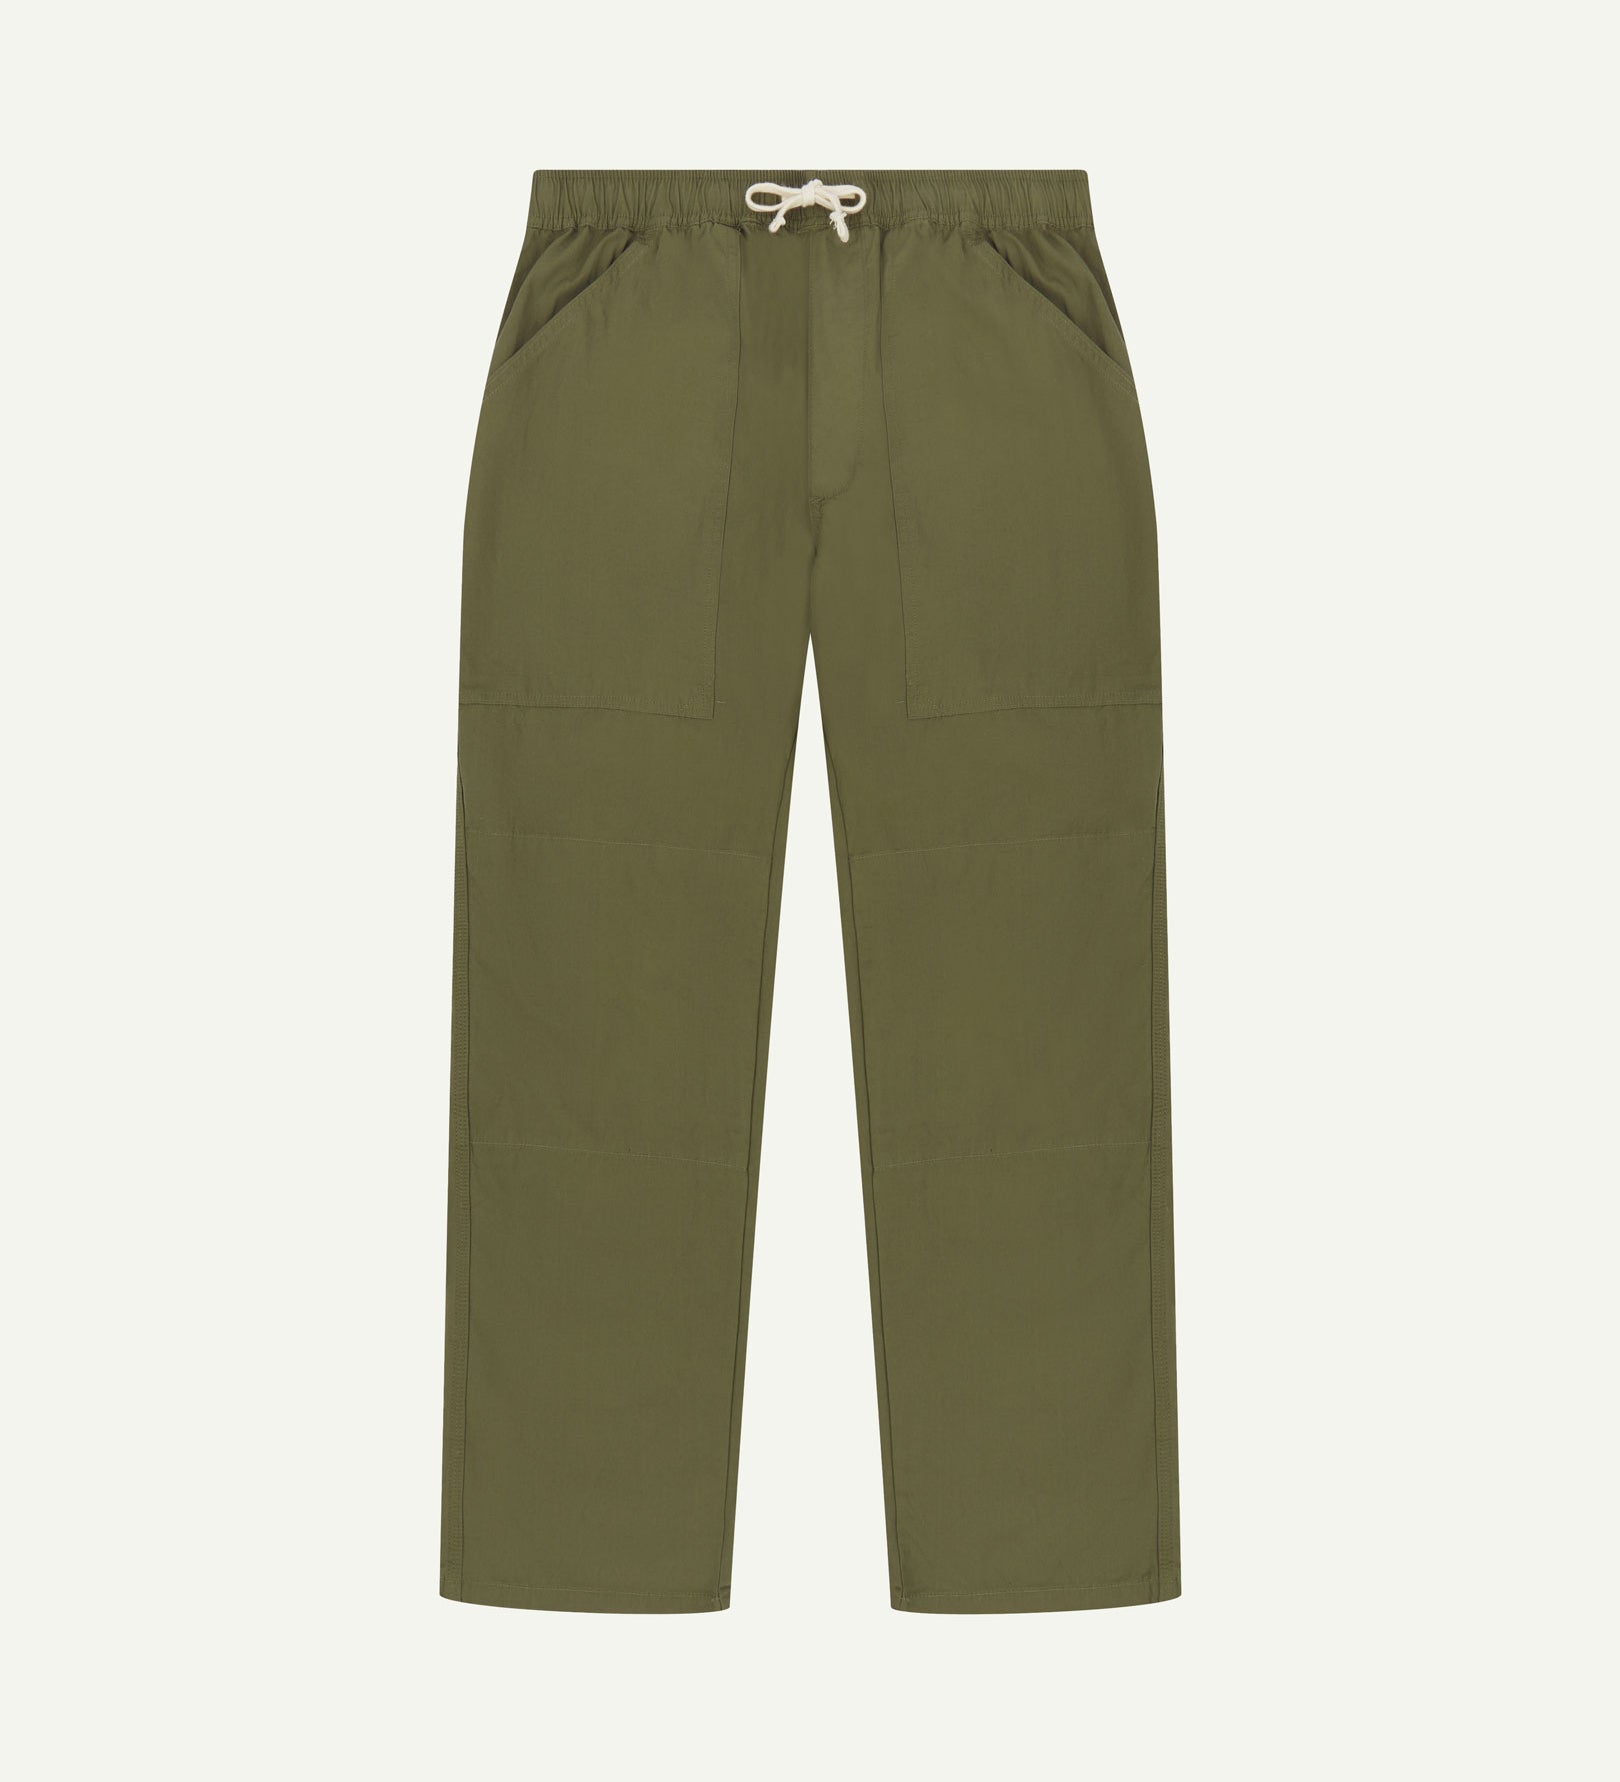 Flat front shot of the Uskees 5020 olive-green lightweight utility pants showing drawstring waist, reinforced knees and large front pockets.